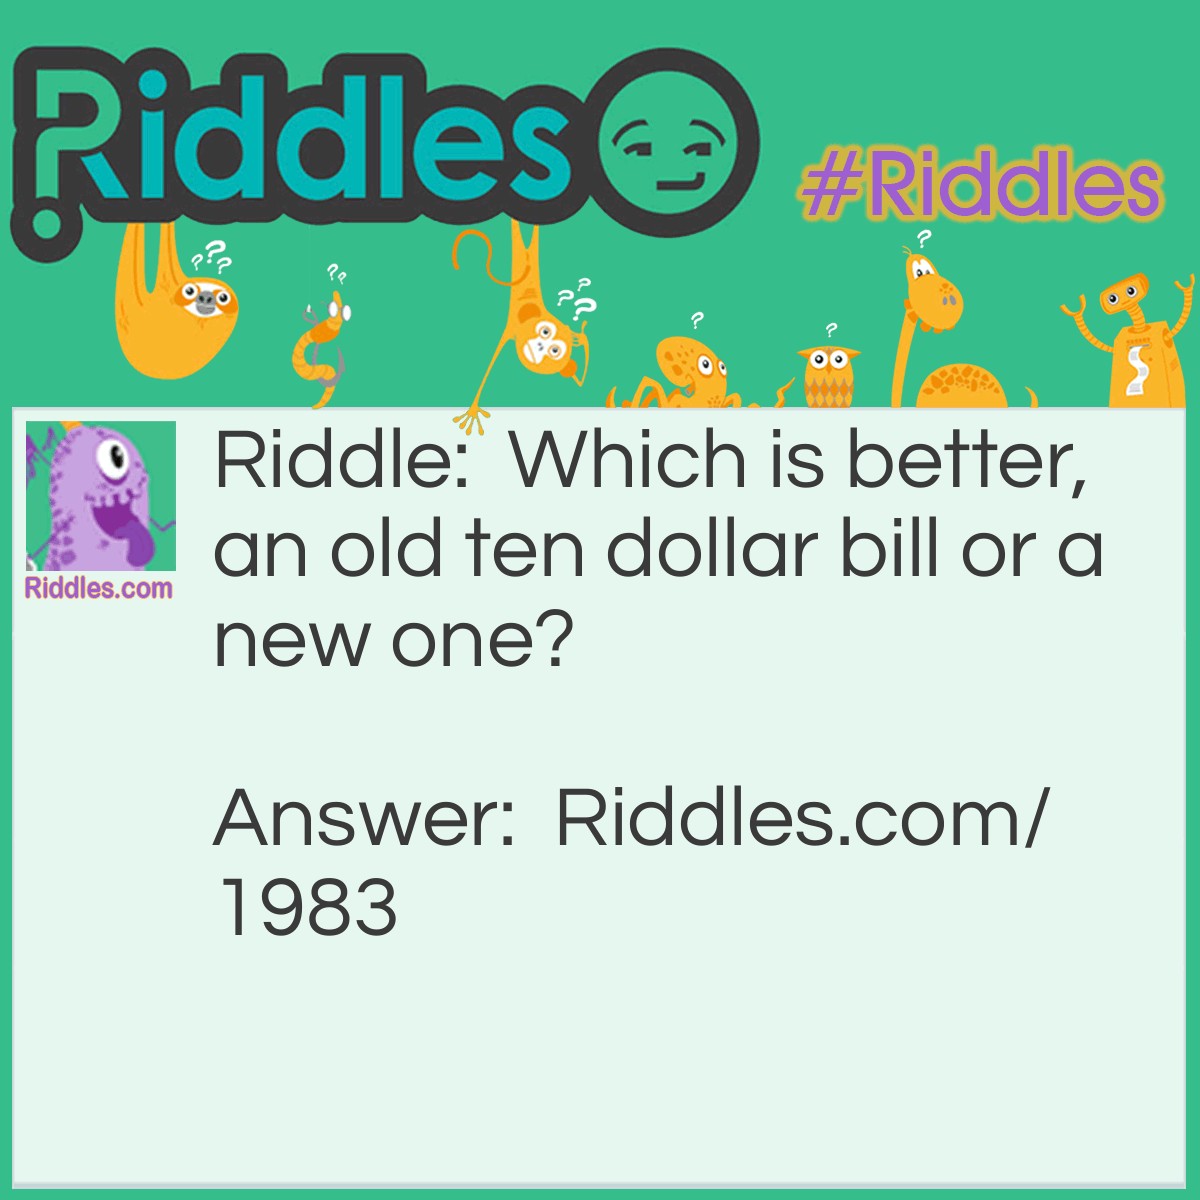 Riddle: Which is better, an old ten dollar bill or a new one? Answer: An old TEN dollar bill is better that just a ONE dollar bill!